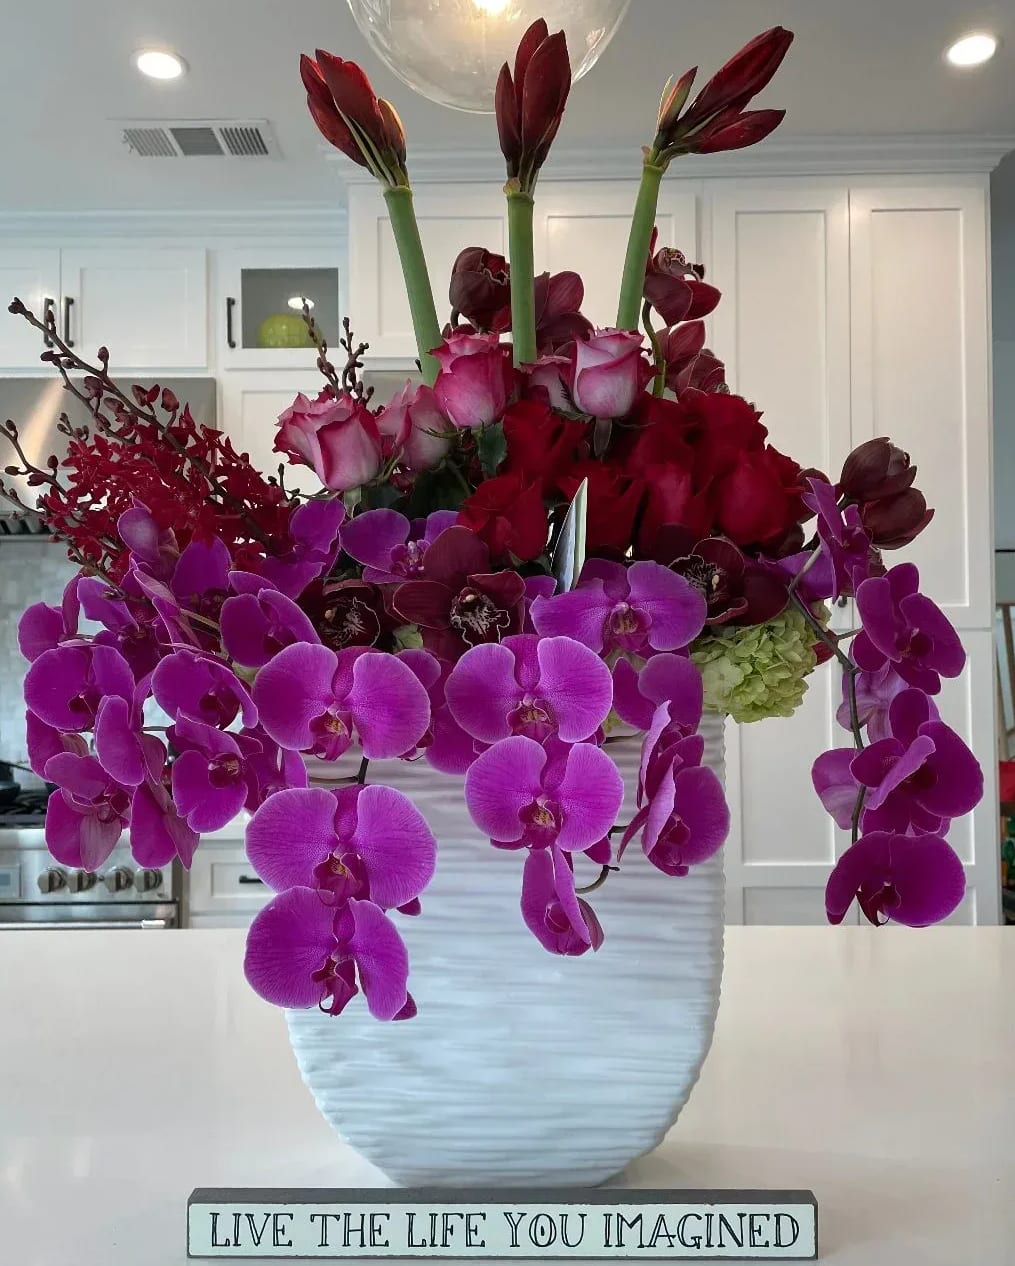 Hummingbird Lane in Purples and Red roses - Make the moment unforgettable with Dave's Flowers, your trusted local florist in Los Angeles, presenting an elegant blend of Amaryllis, Hydrangeas, Roses, and cascading Orchids arranged in a tall, striking ceramic vase. Watch as the eyes of your loved one light up at the first glance of this sophisticated floral masterpiece.  Offering Same-Day Flower Delivery in Los Angeles, we specialize in transforming emotions into exquisite arrangements. Our carefully curated selection of Amaryllis, Hydrangeas, Roses, and Orchids is designed to captivate and enchant, ensuring that your special moments are adorned with timeless beauty.  Elevate your gifting experience with the stunning contrast of colors and textures in our tall ceramic vase. Dave's Flowers understands the importance of creating lasting memories, and our floral arrangements are crafted with precision and passion.  Surprise your loved one with the elegance of Amaryllis, the lushness of Hydrangeas, the timeless beauty of Roses, and the graceful allure of cascading Orchids. Explore Dave's Flowers today for a diverse selection of floral expressions that leave a lasting impression. Trust us to make your moments extraordinary.